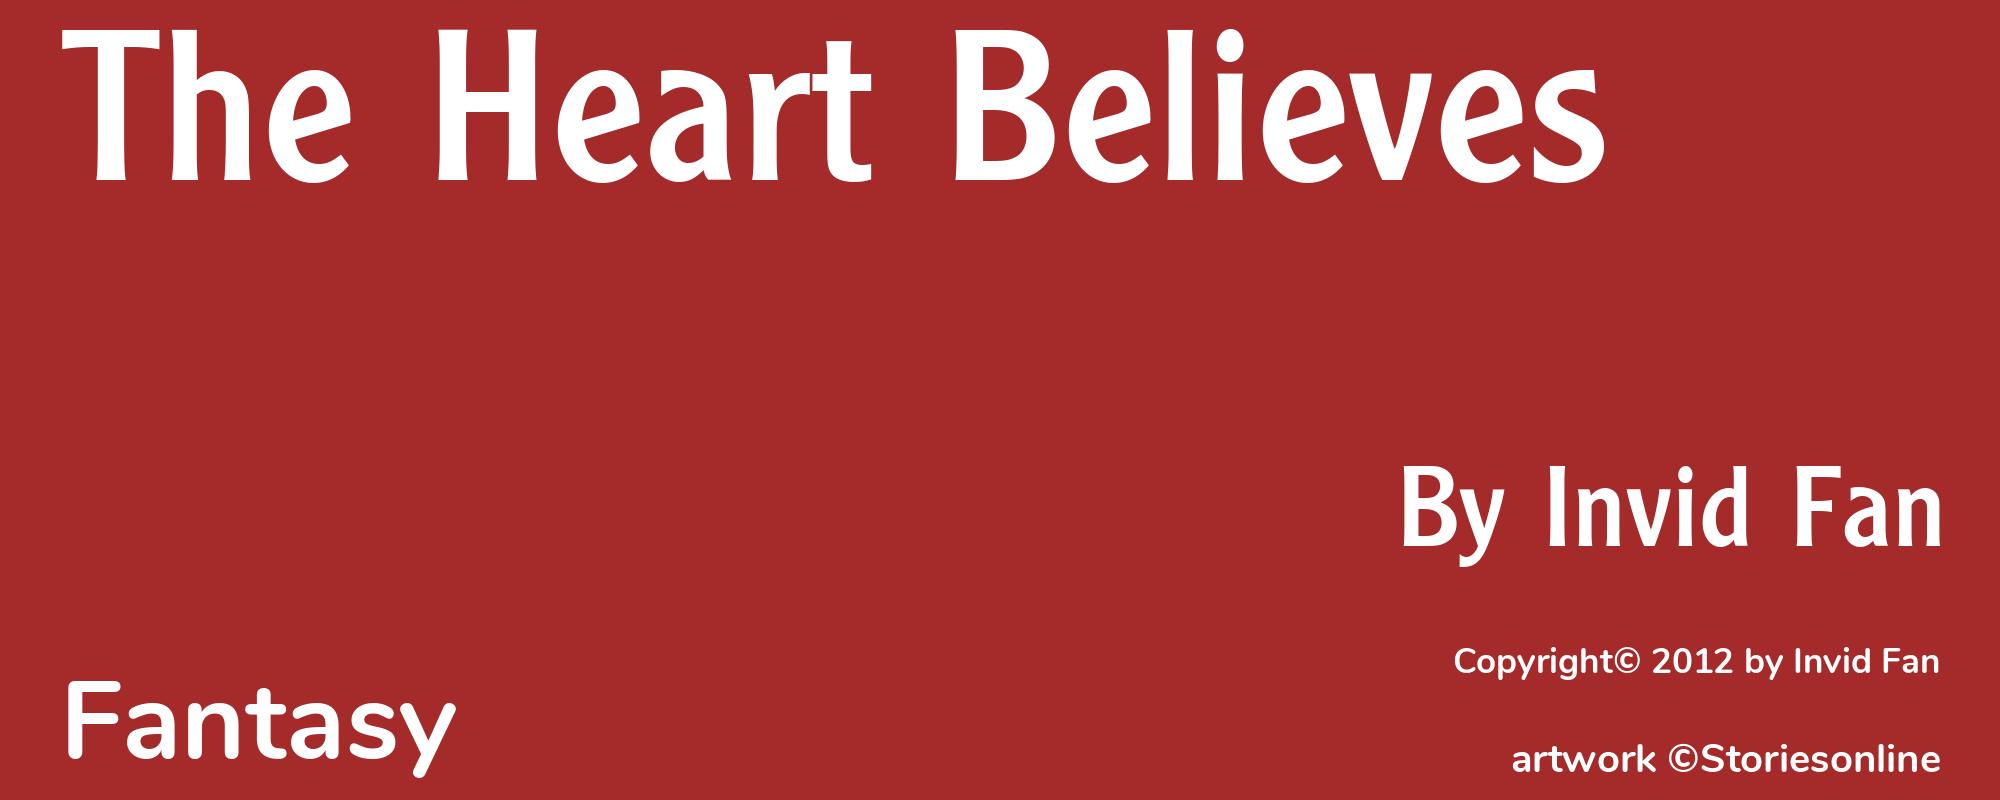 The Heart Believes - Cover